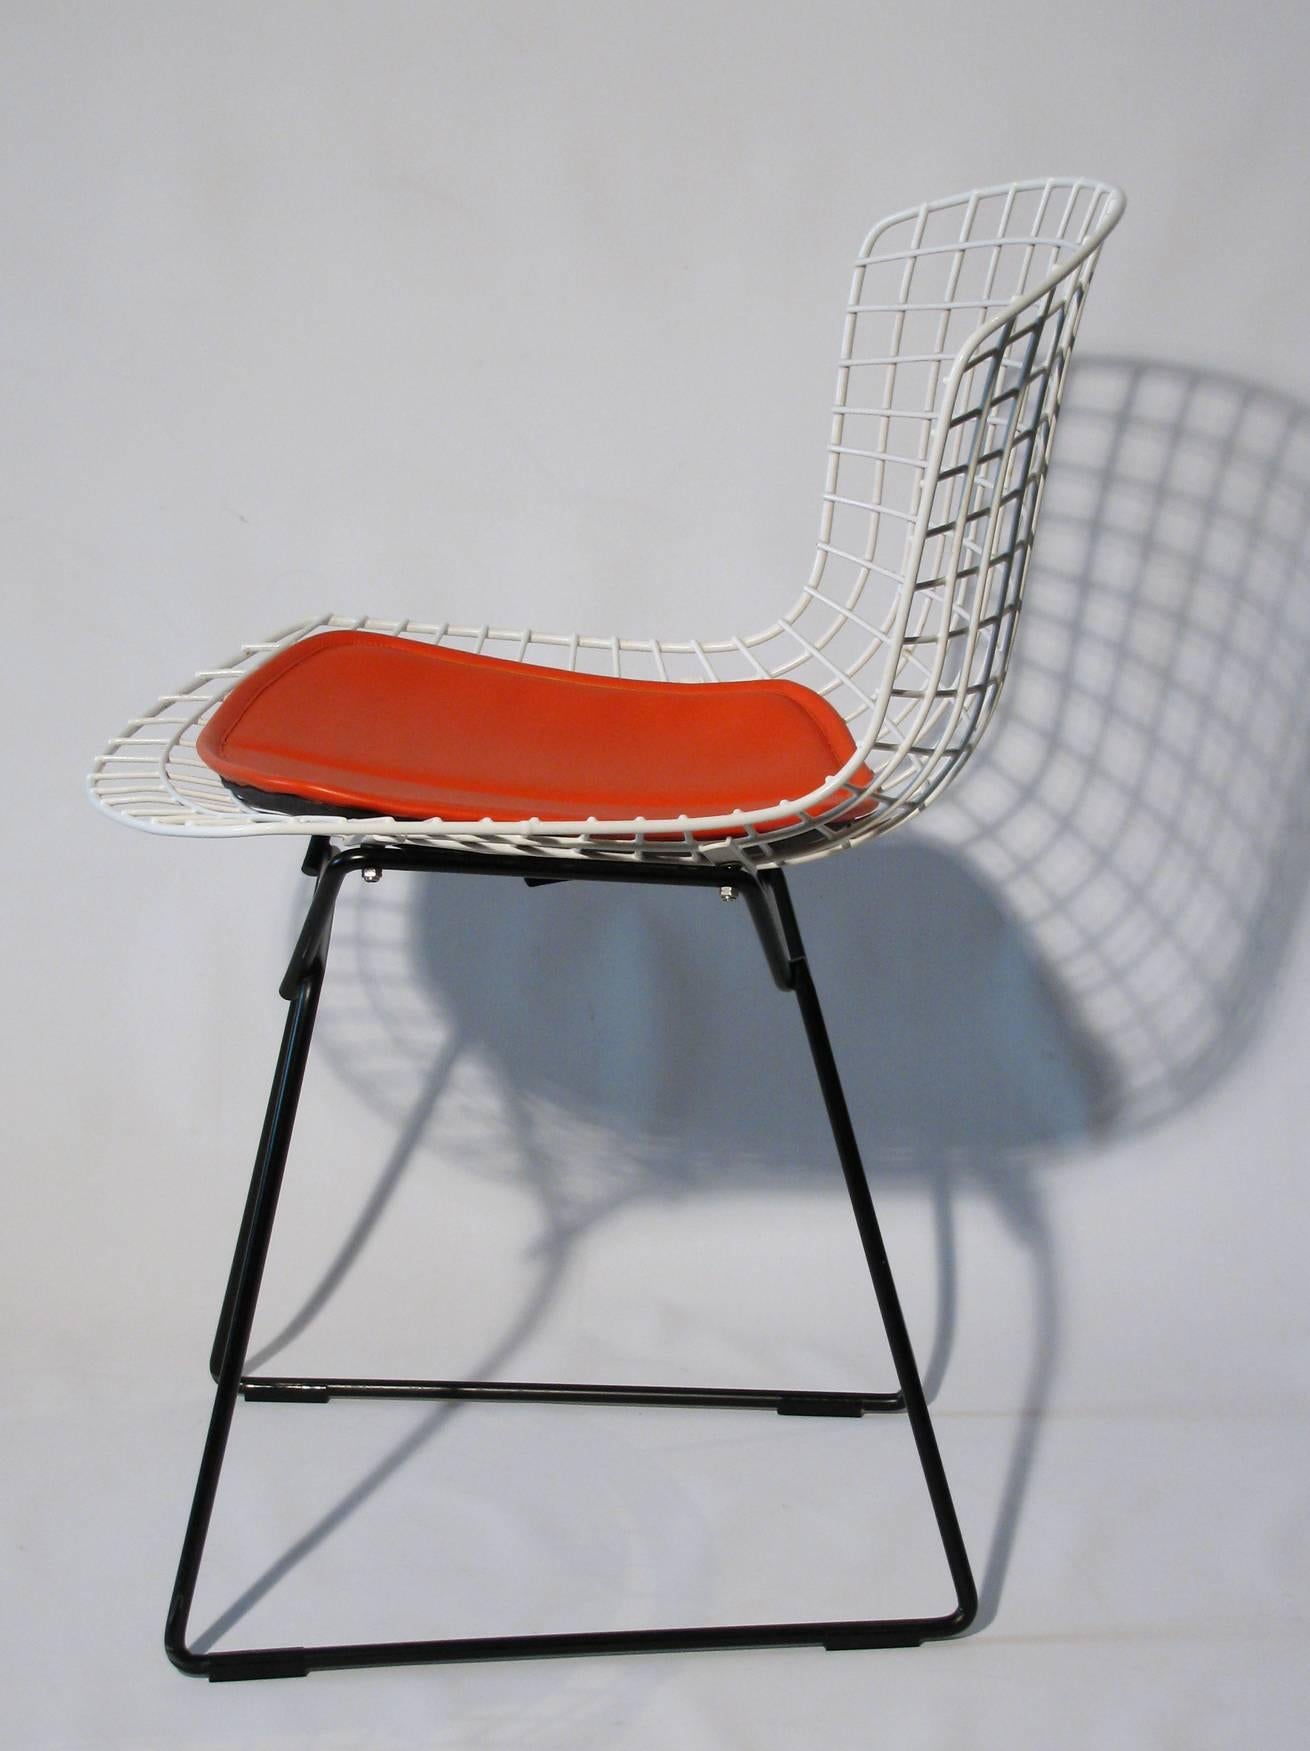 A chic pair of side chairs by Harry Bertoia (Italian/ American, 1915-1978) for Knoll. White enamel wire seat with black base; each having an orange padded seat.